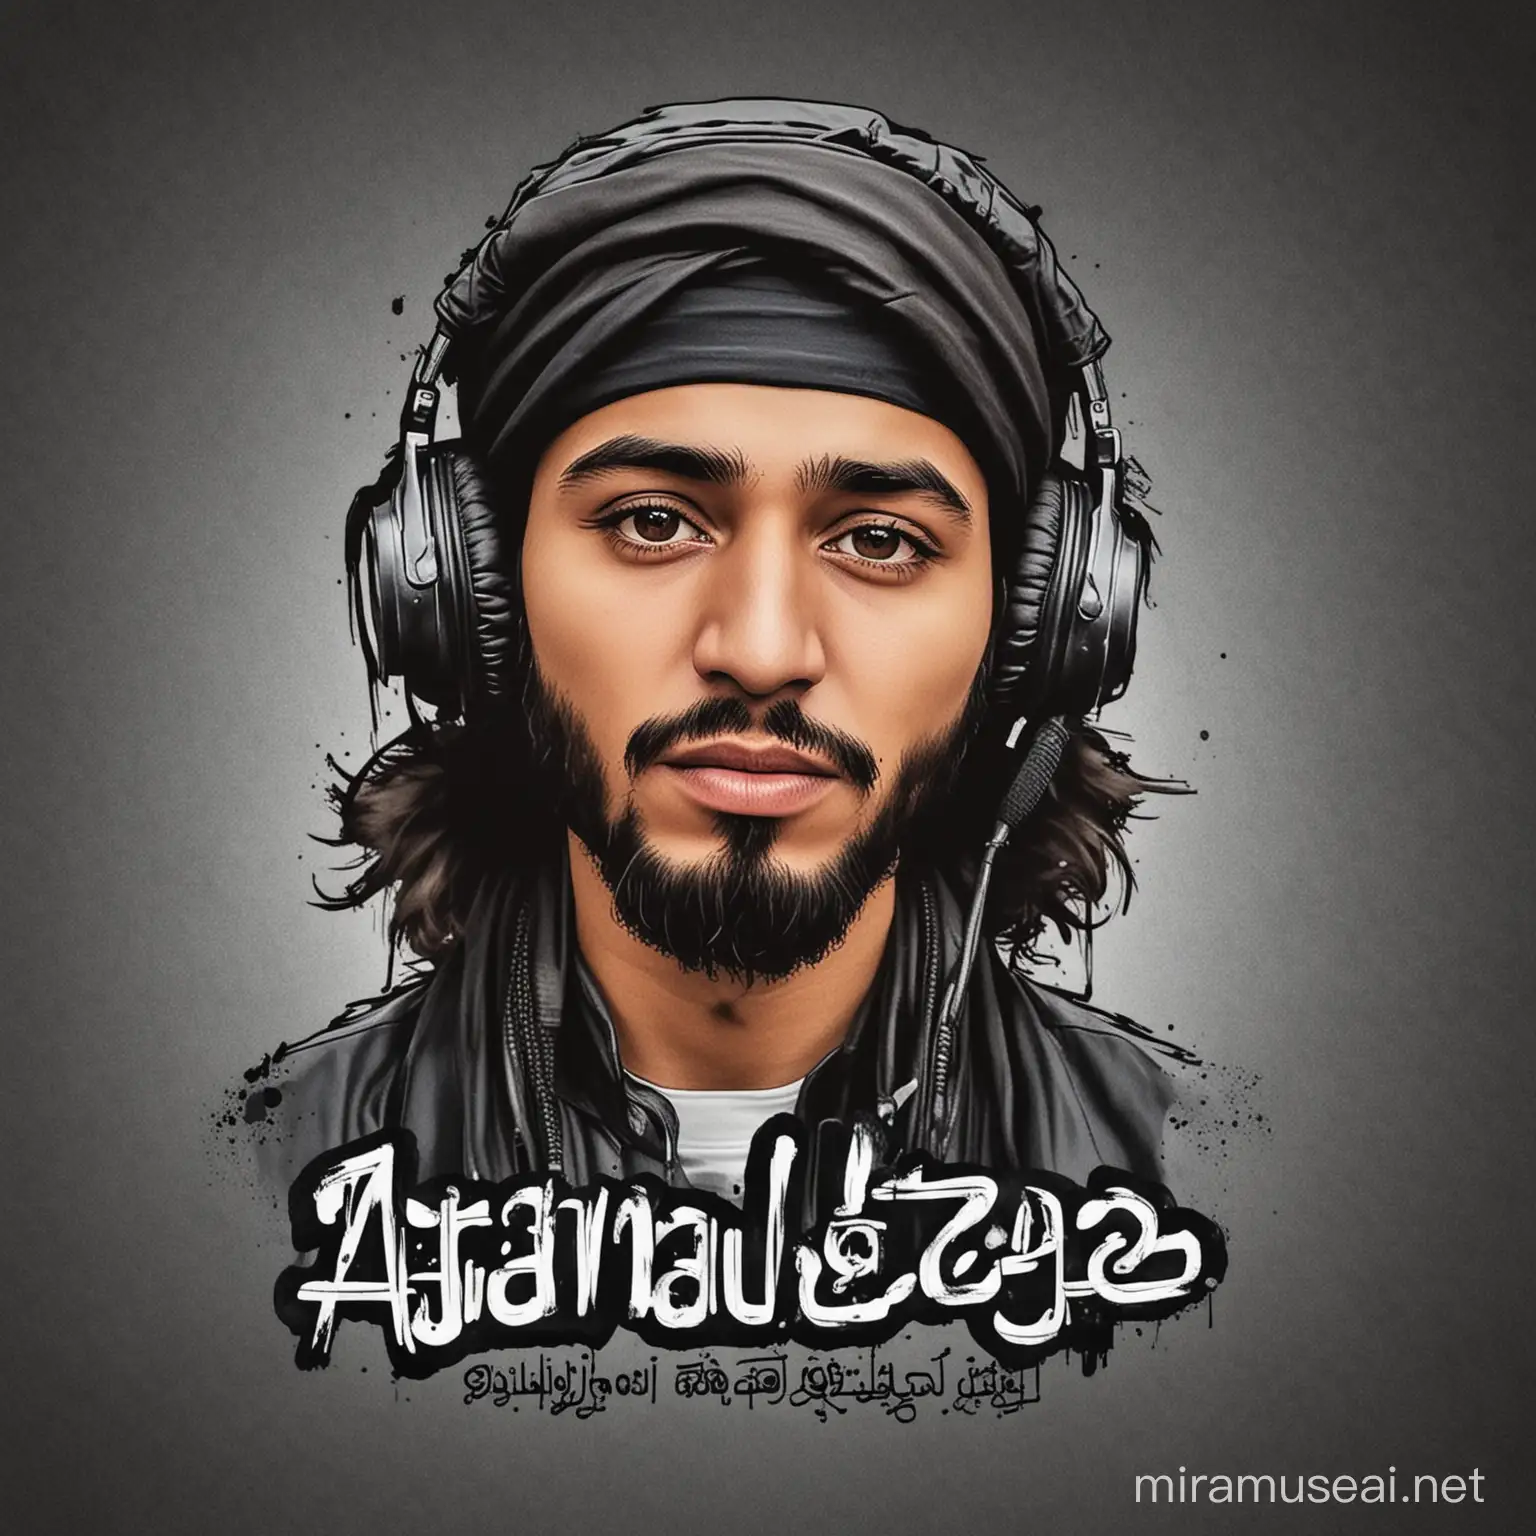 A profile logo for a channel in the field of presenting Afghan rap songs